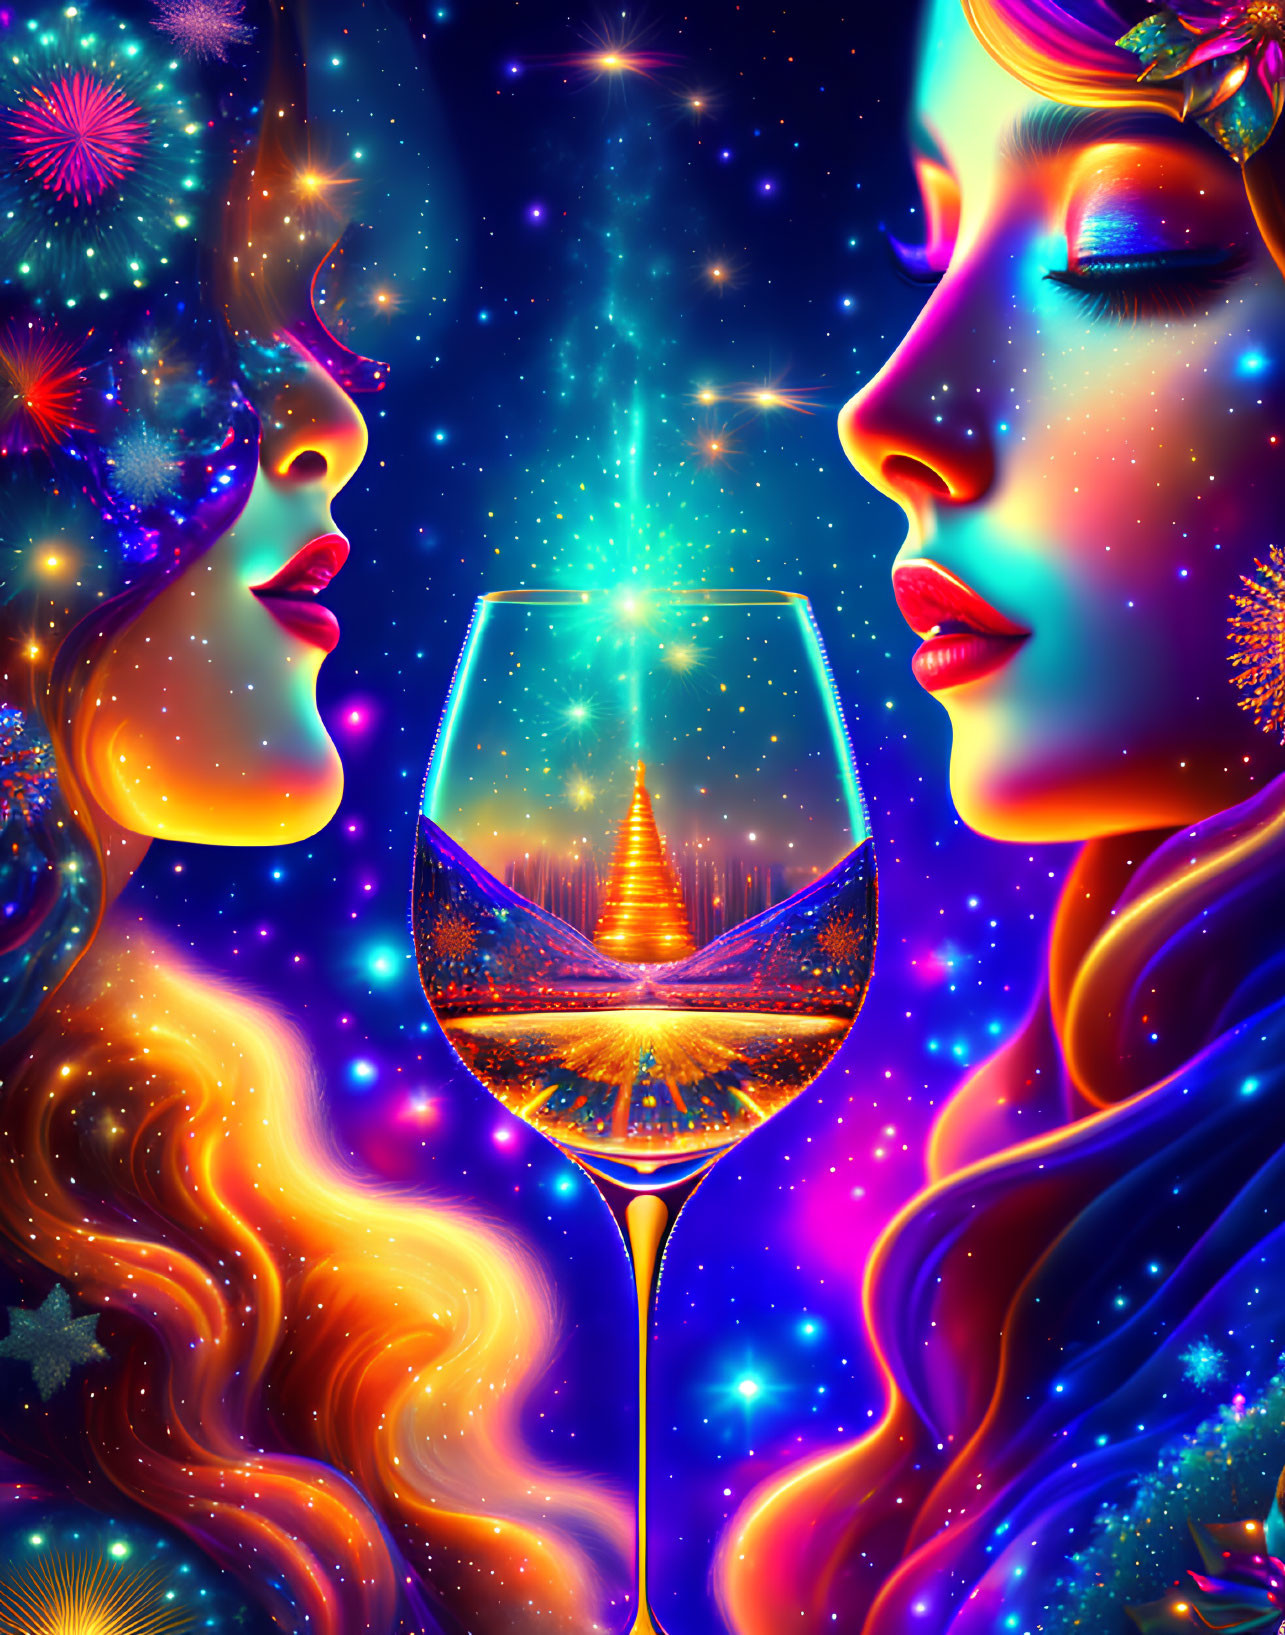 Colorful illustration of two stylized female profiles with cosmic and floral motifs around a wine glass and city